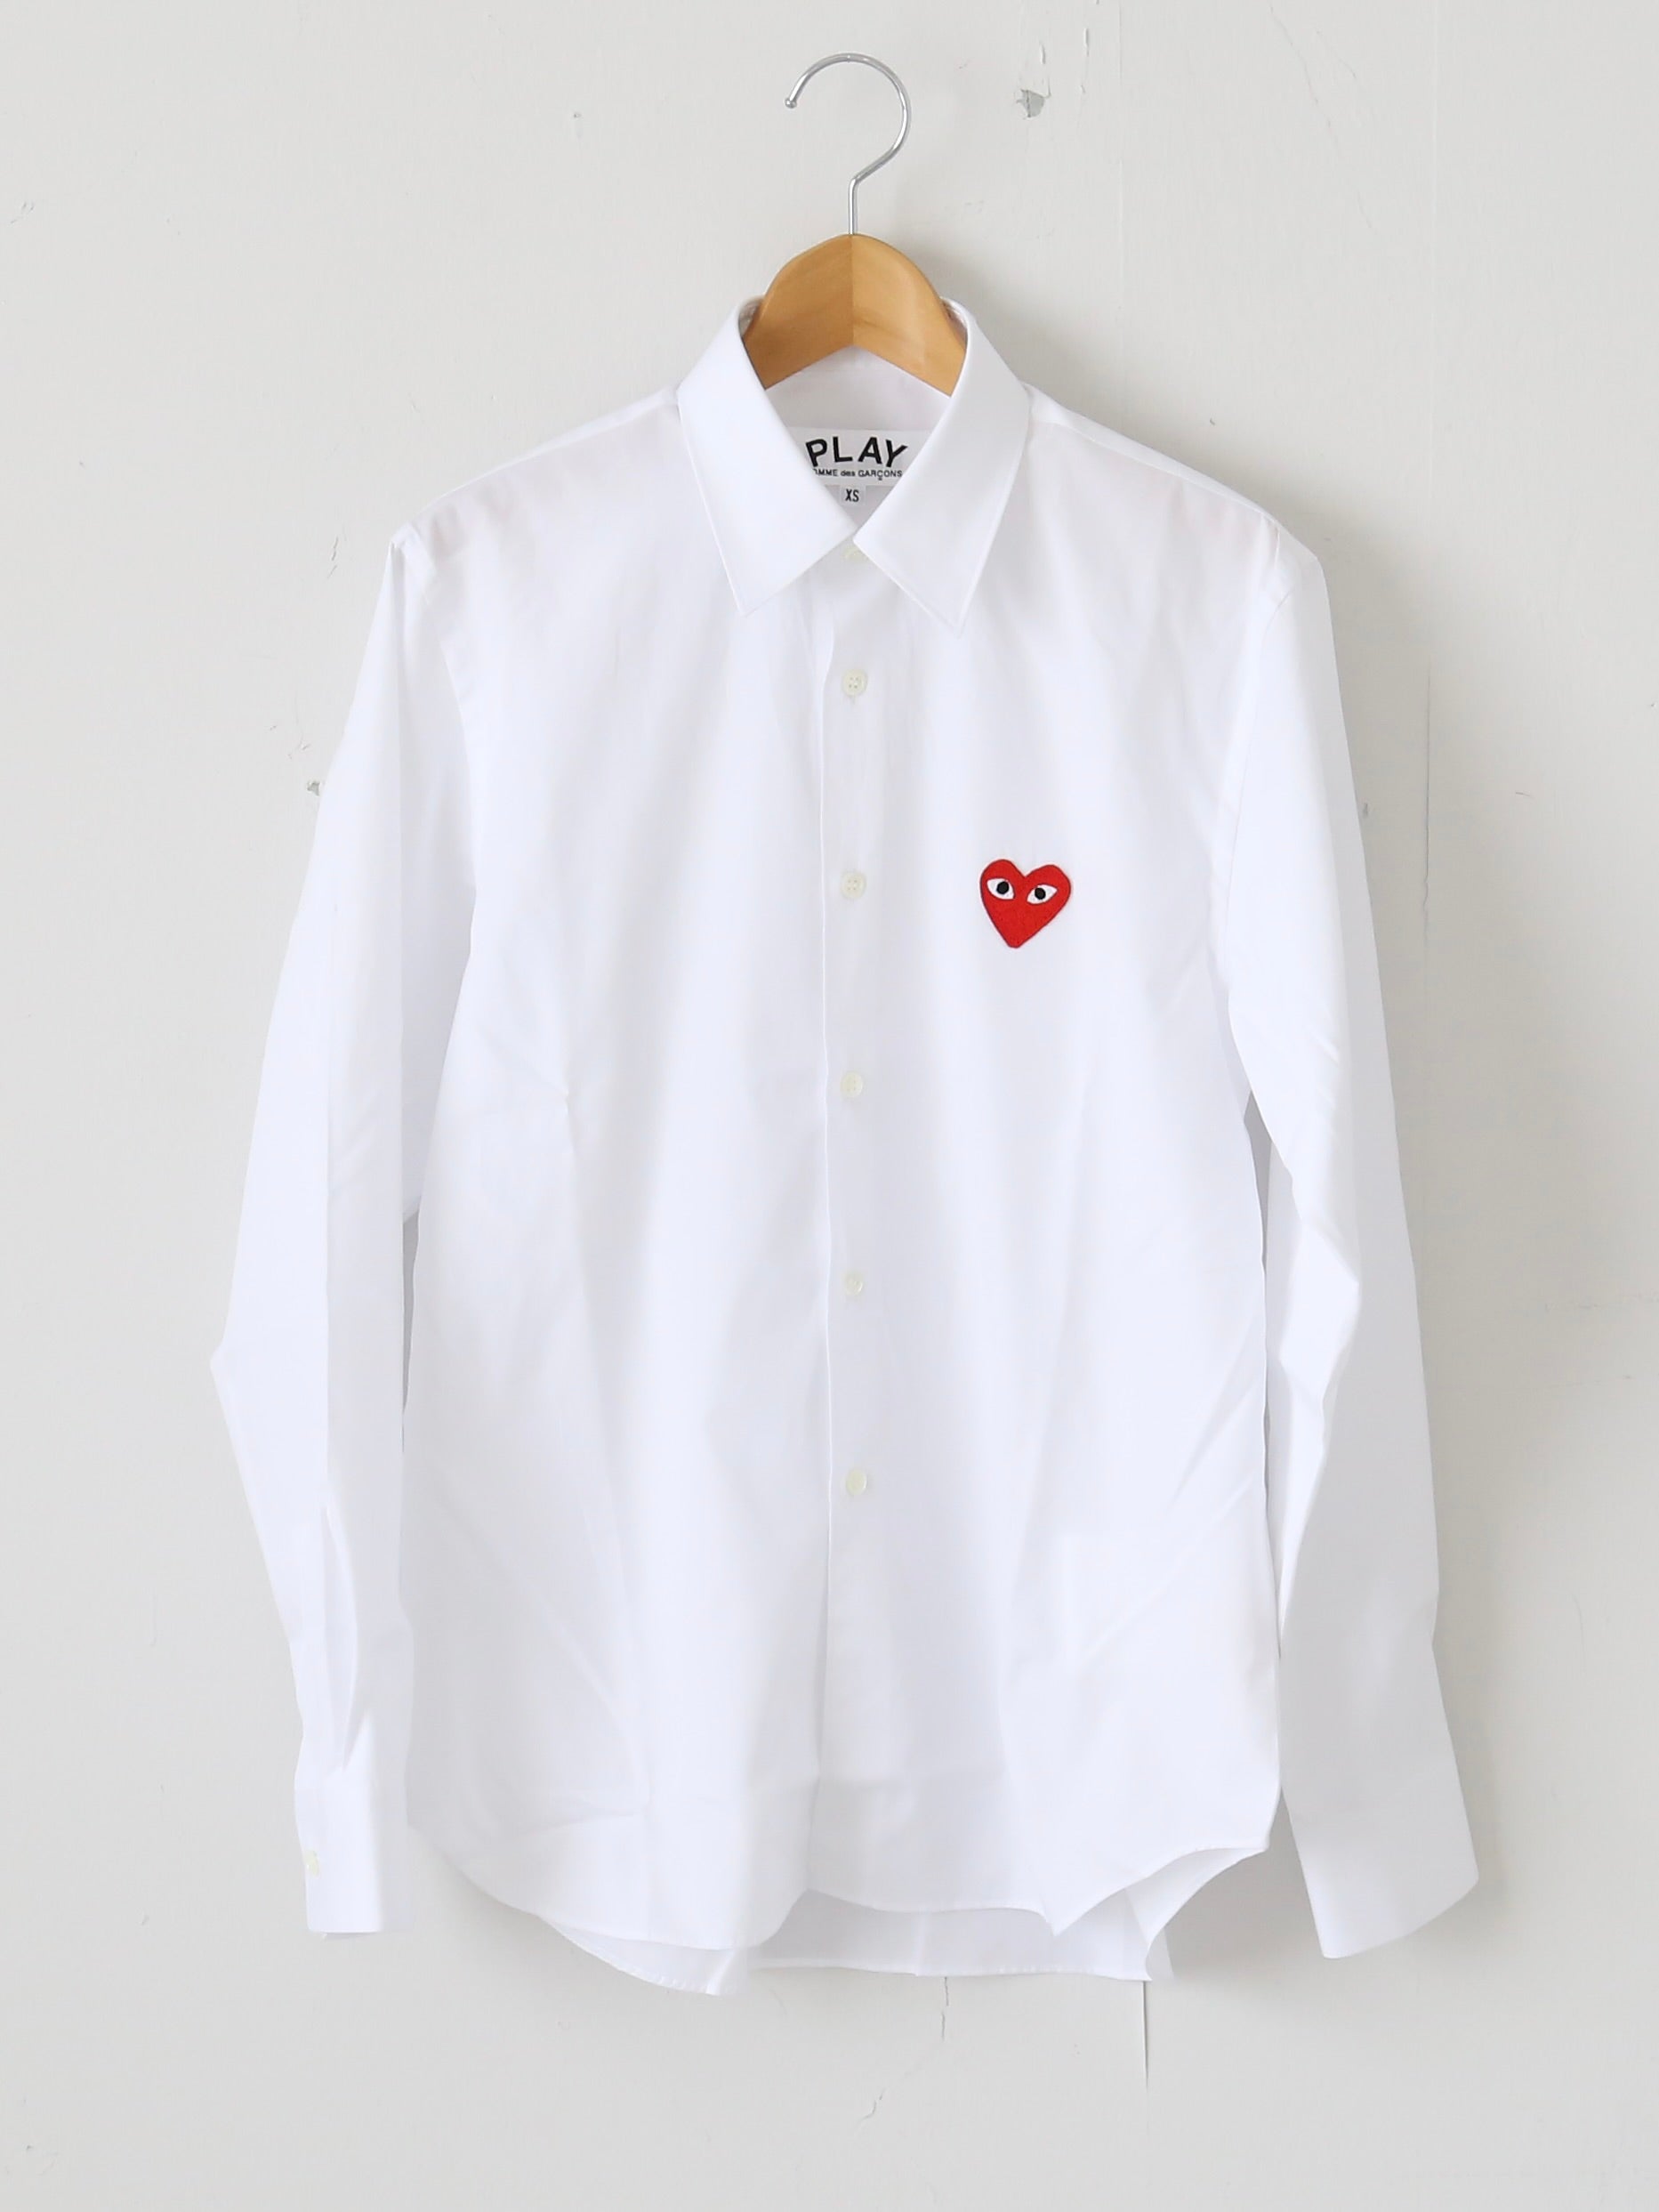 PLAY COMME des GARCONS ブラウス(ホワイト×レッド) [AX-B002-051] – CREER